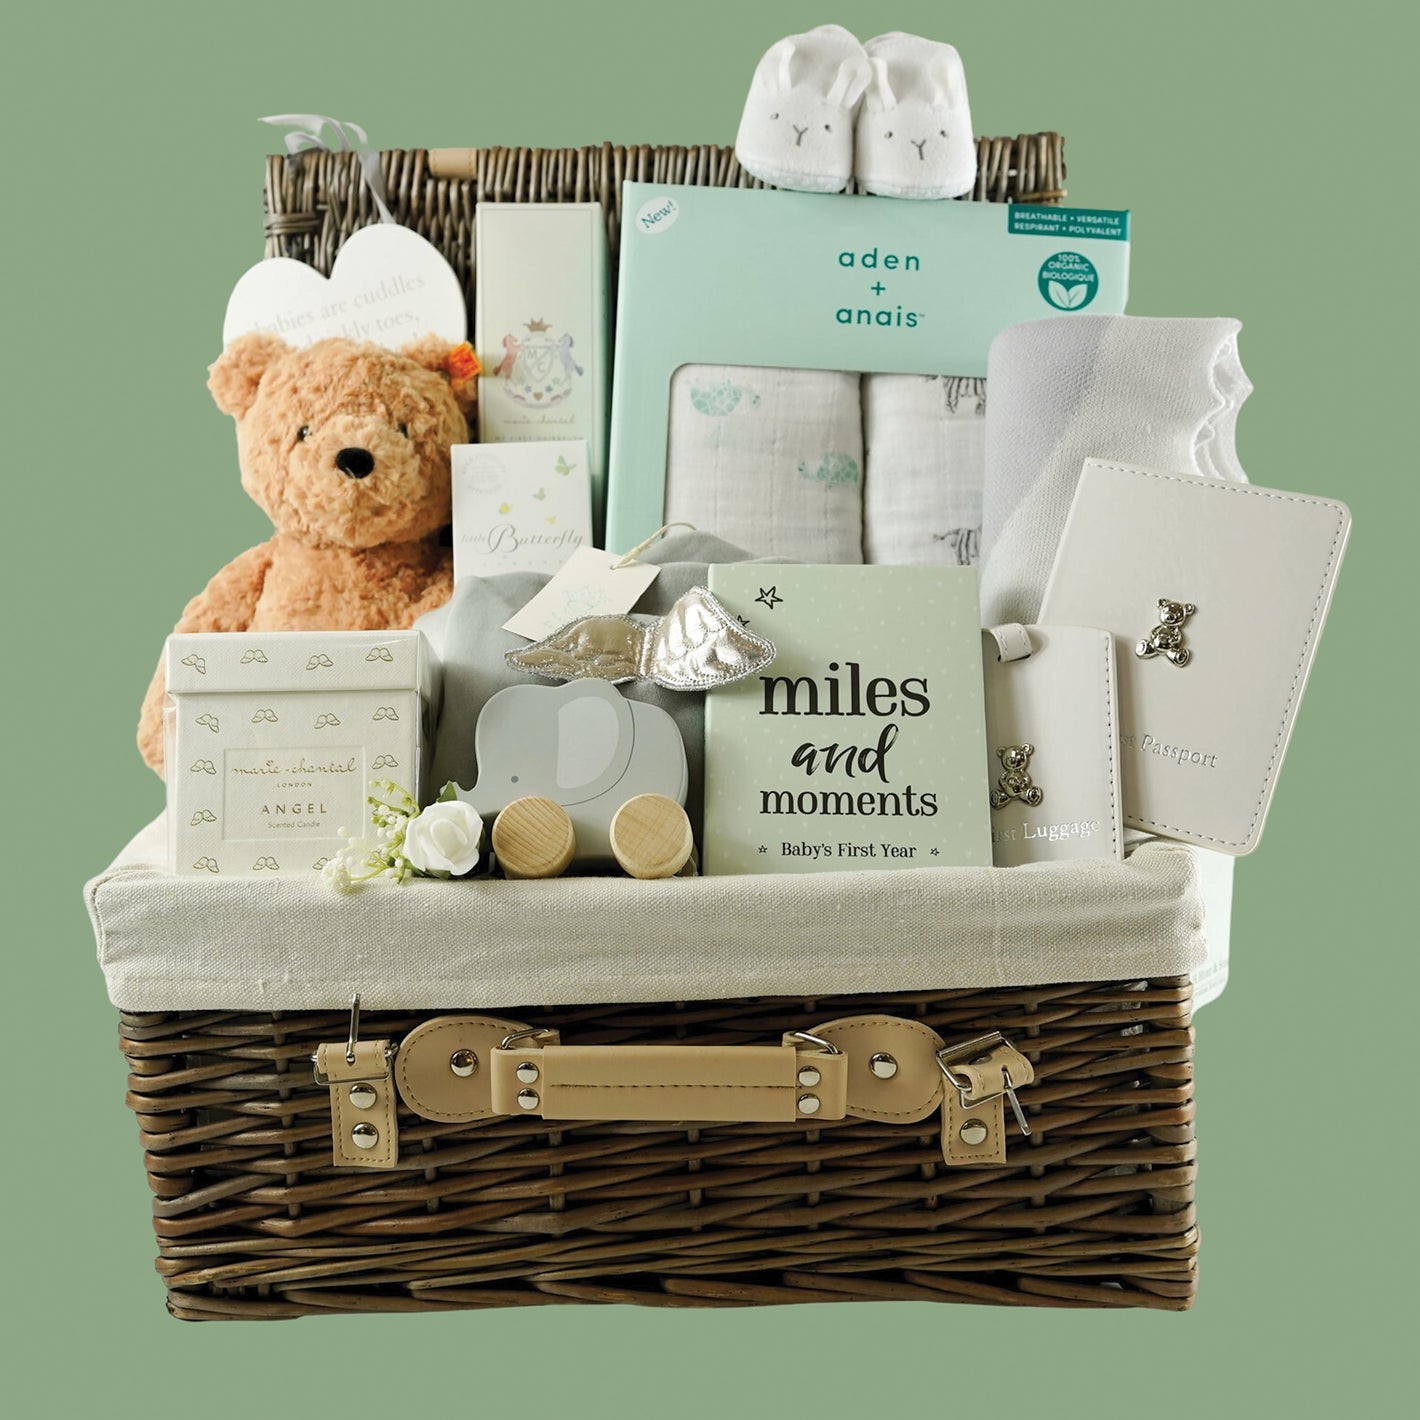 Hamper basket with luxury baby velour sleepsuit, luxury Marie Chantal candle, Baby muslin swaddles, baby luggage label and baby passport holder, Steiff teddy bear, soft natural baby hairbrush